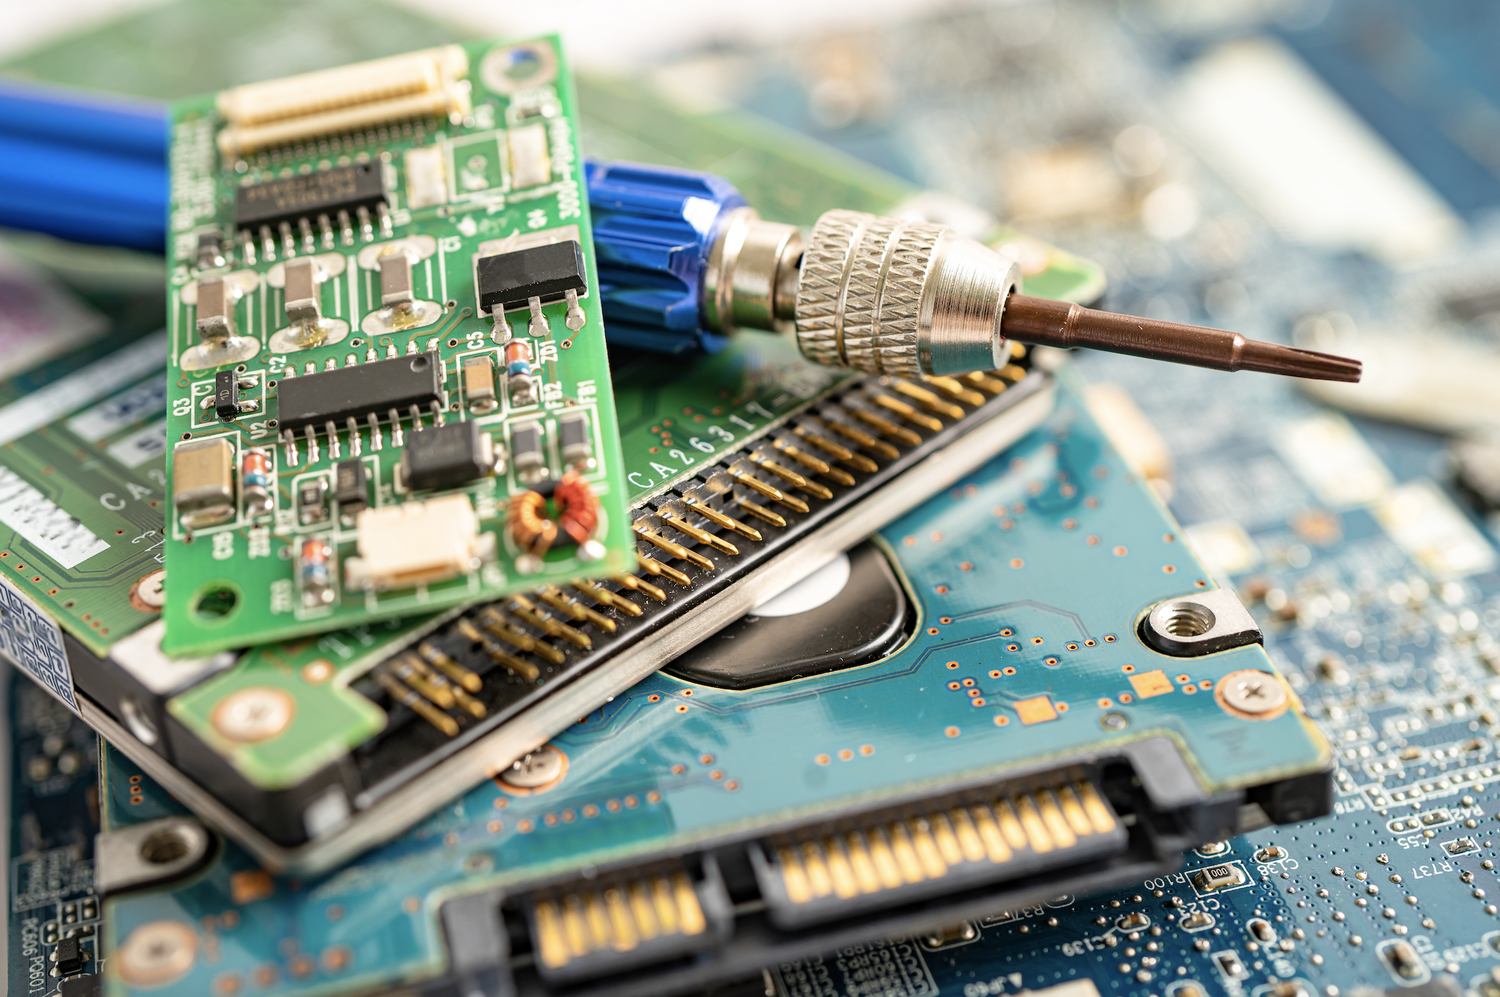 What are the Top Ways to Repair, Reuse, and Recycle Old Electronics